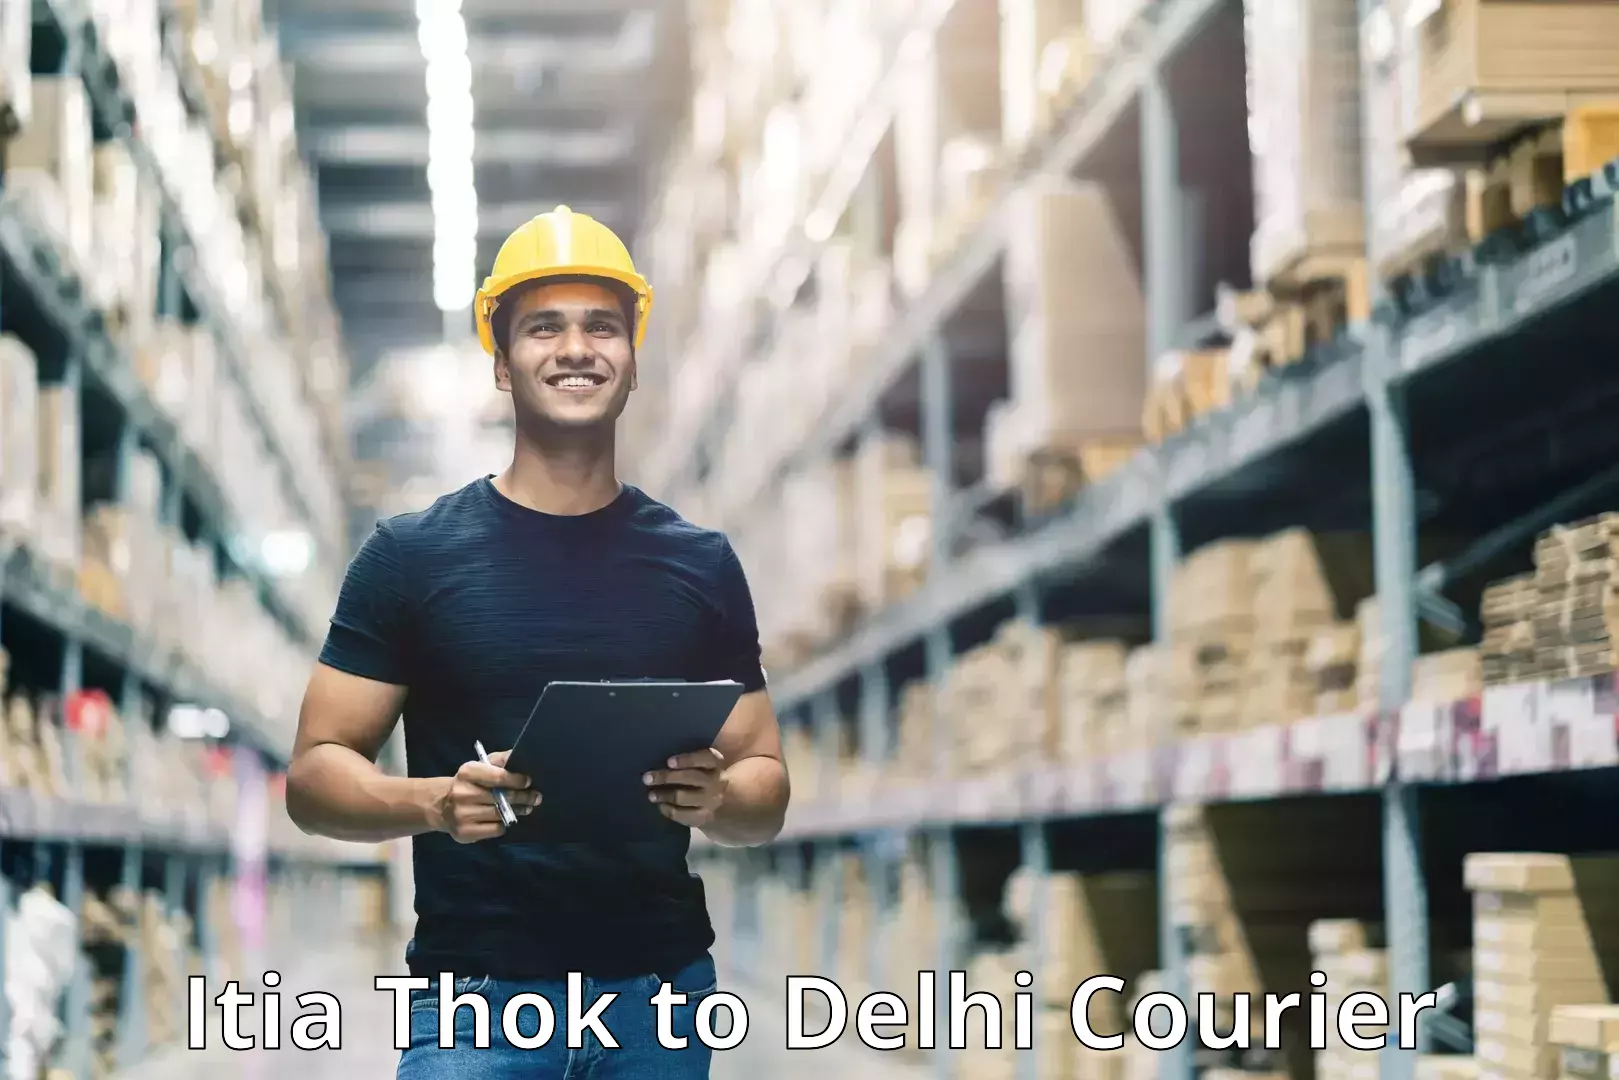 Seamless shipping service in Itia Thok to Lodhi Road